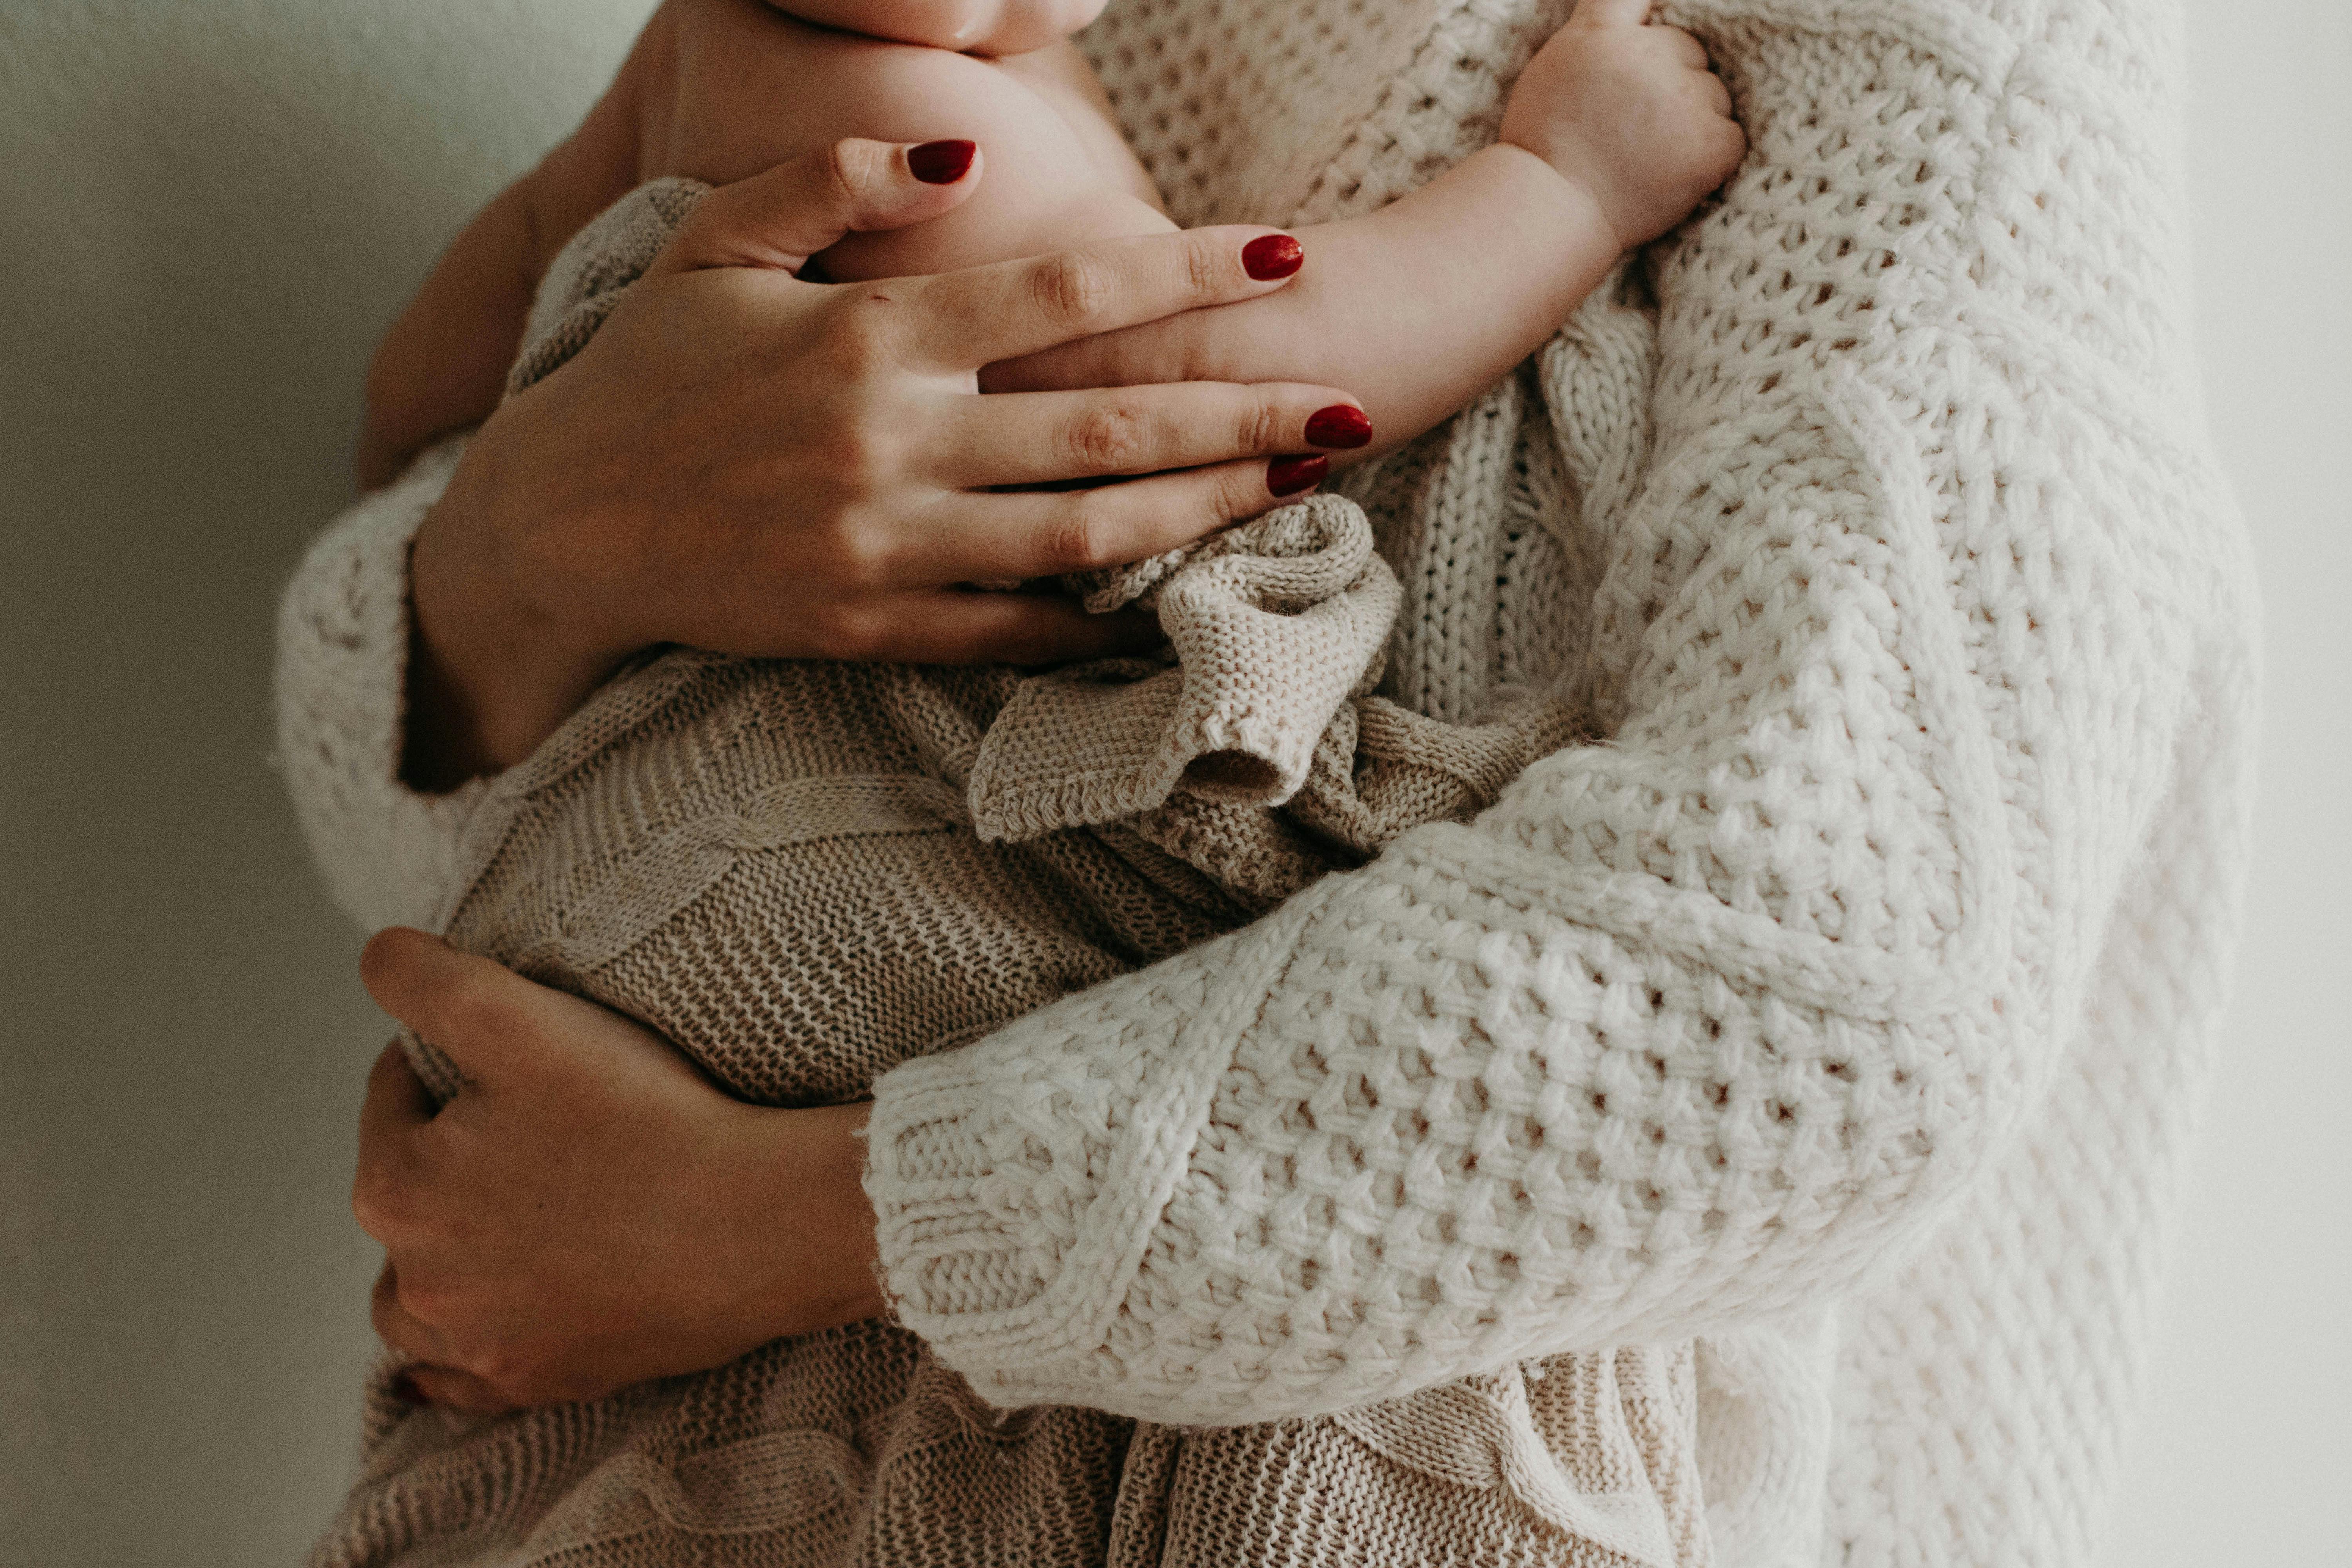 Woman with her baby | Source: Pexels